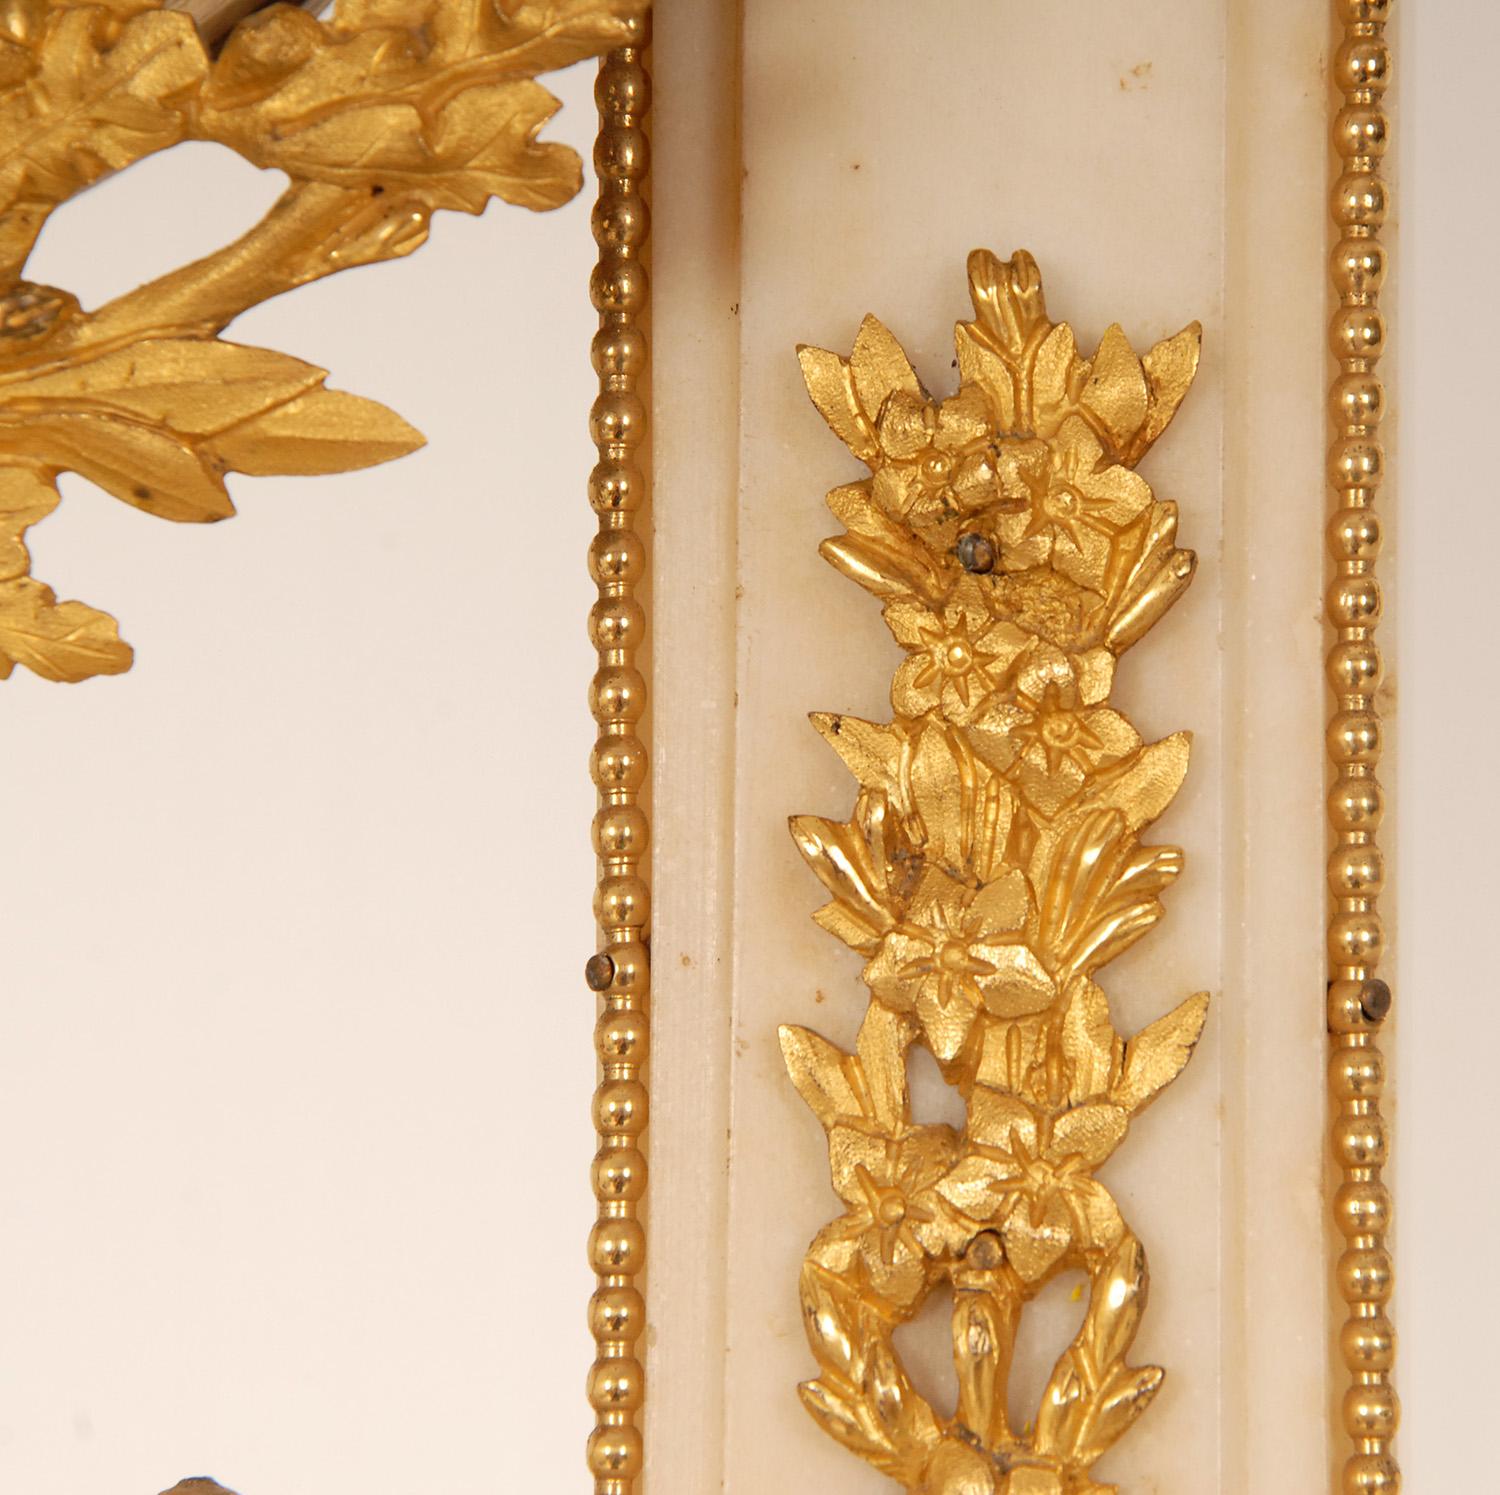 Hand-Crafted 18th Century French Mantel Clock Pendulum White Marble Ormolu Gold Gilded Bronze